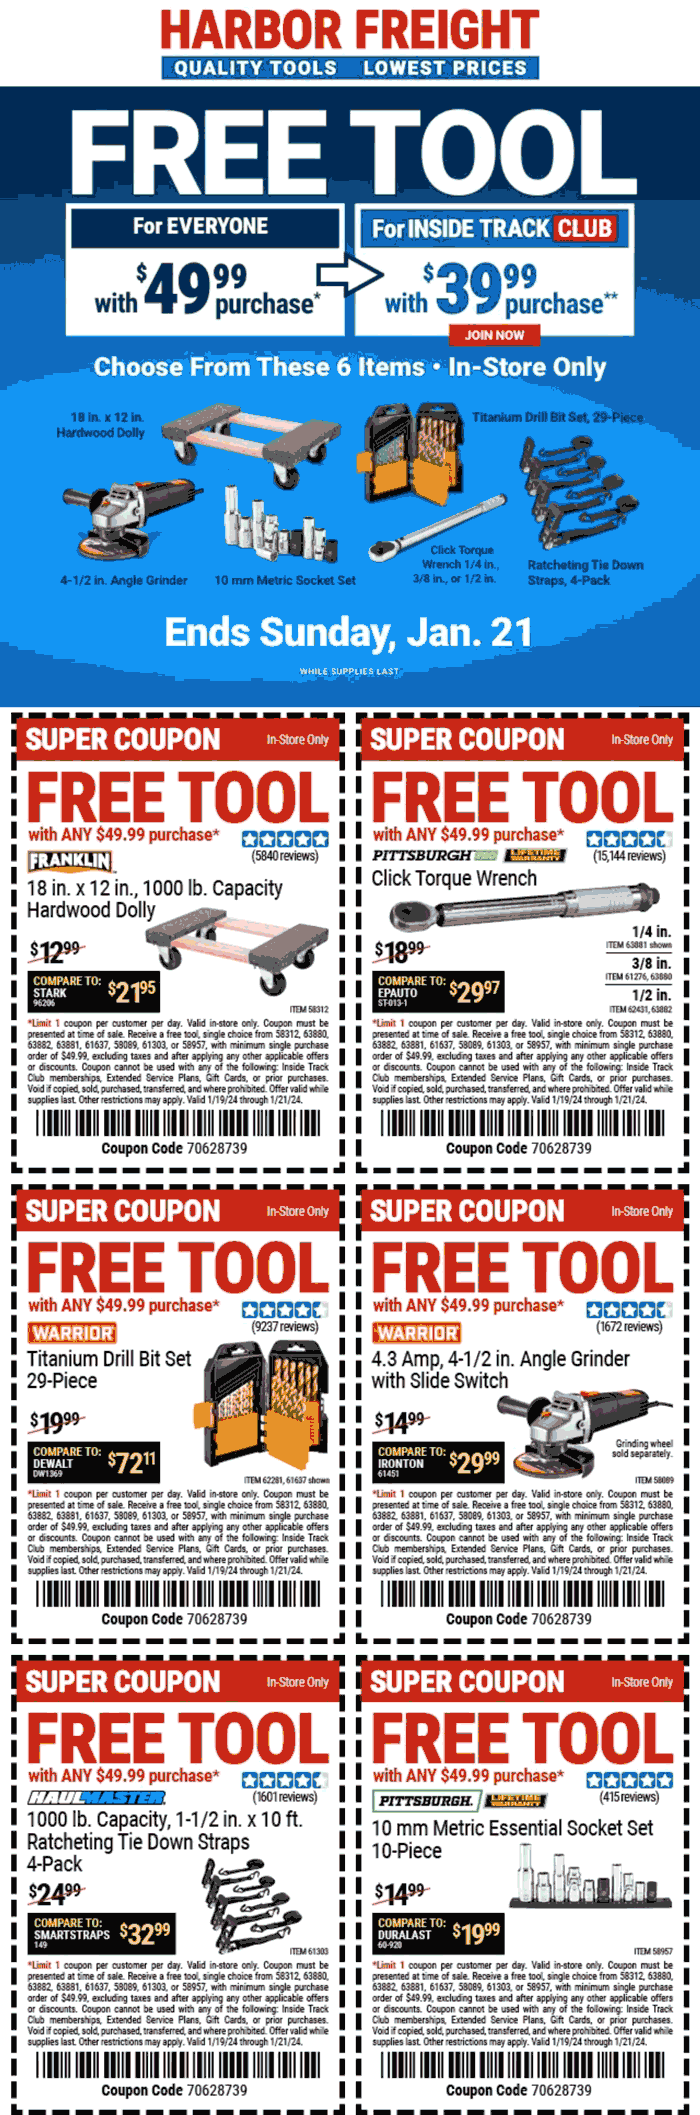 Choice of free angle grinder, dolly, sockets & more items on $50 today at Harbor Freight Tools #harborfreight